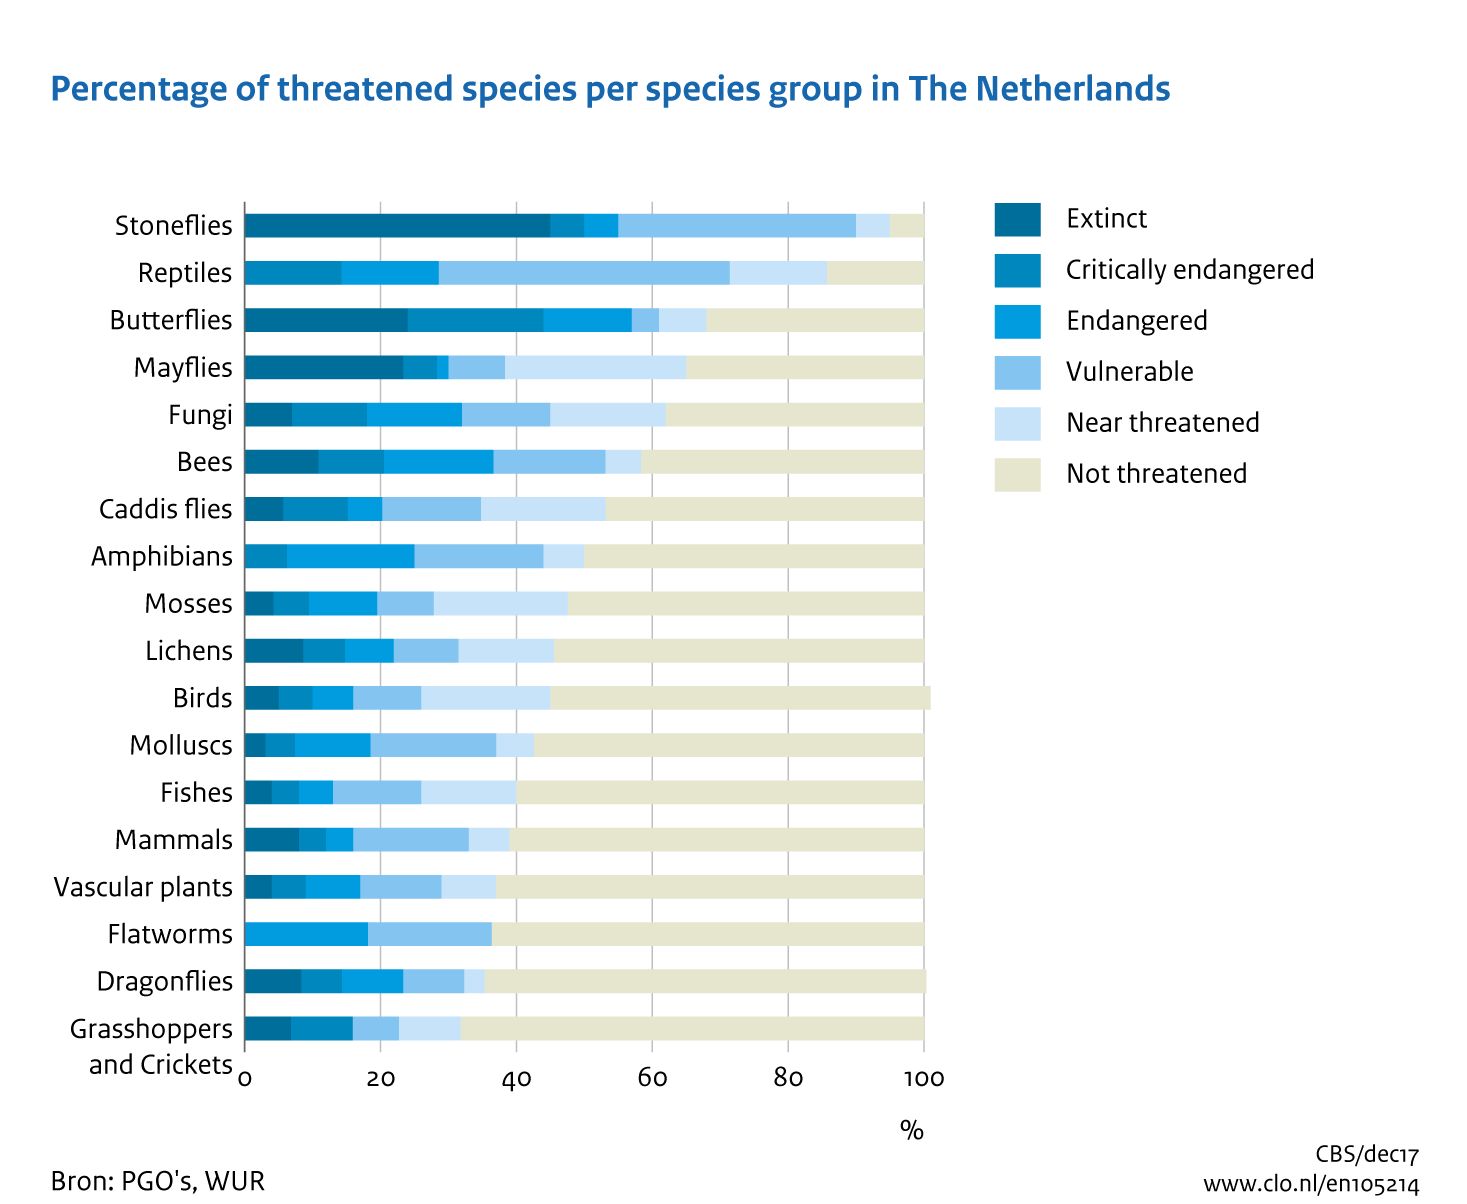 Image Threatened species in The Netherlands. The image is further explained in the text.